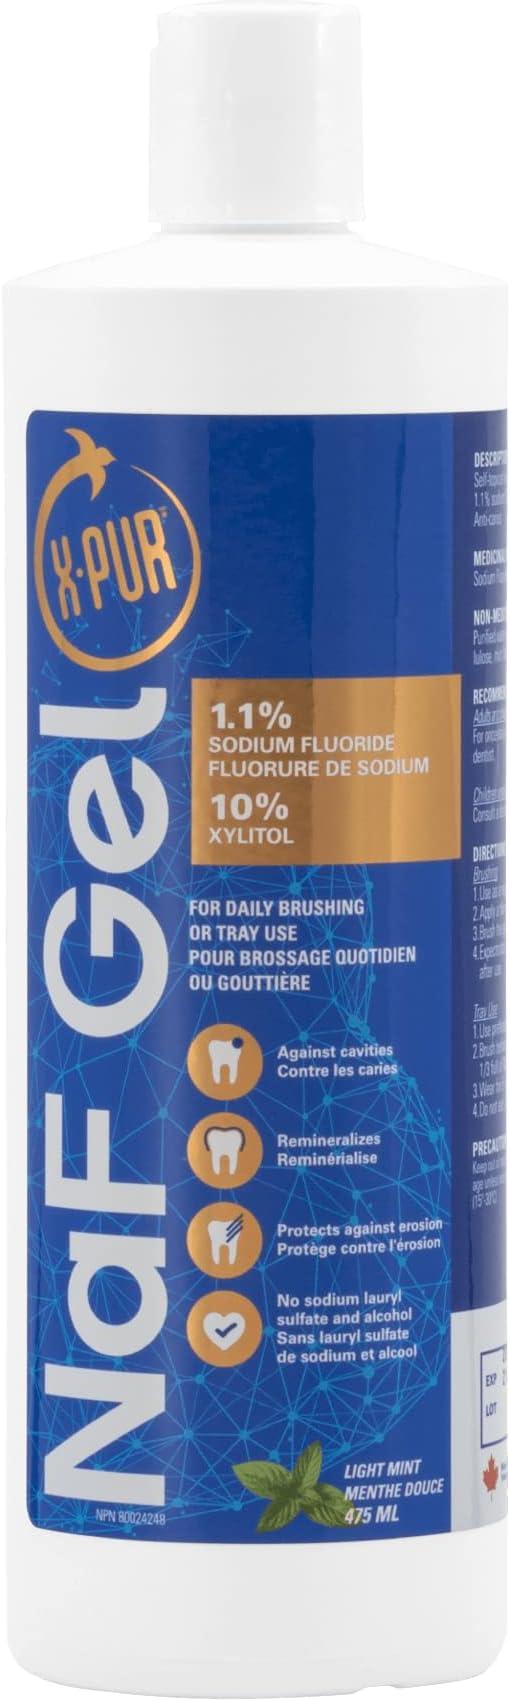 x-pur naf gel high strength fluoride gel toothpaste with 10 percent xylitol  x-pur ?b08p3wylc1